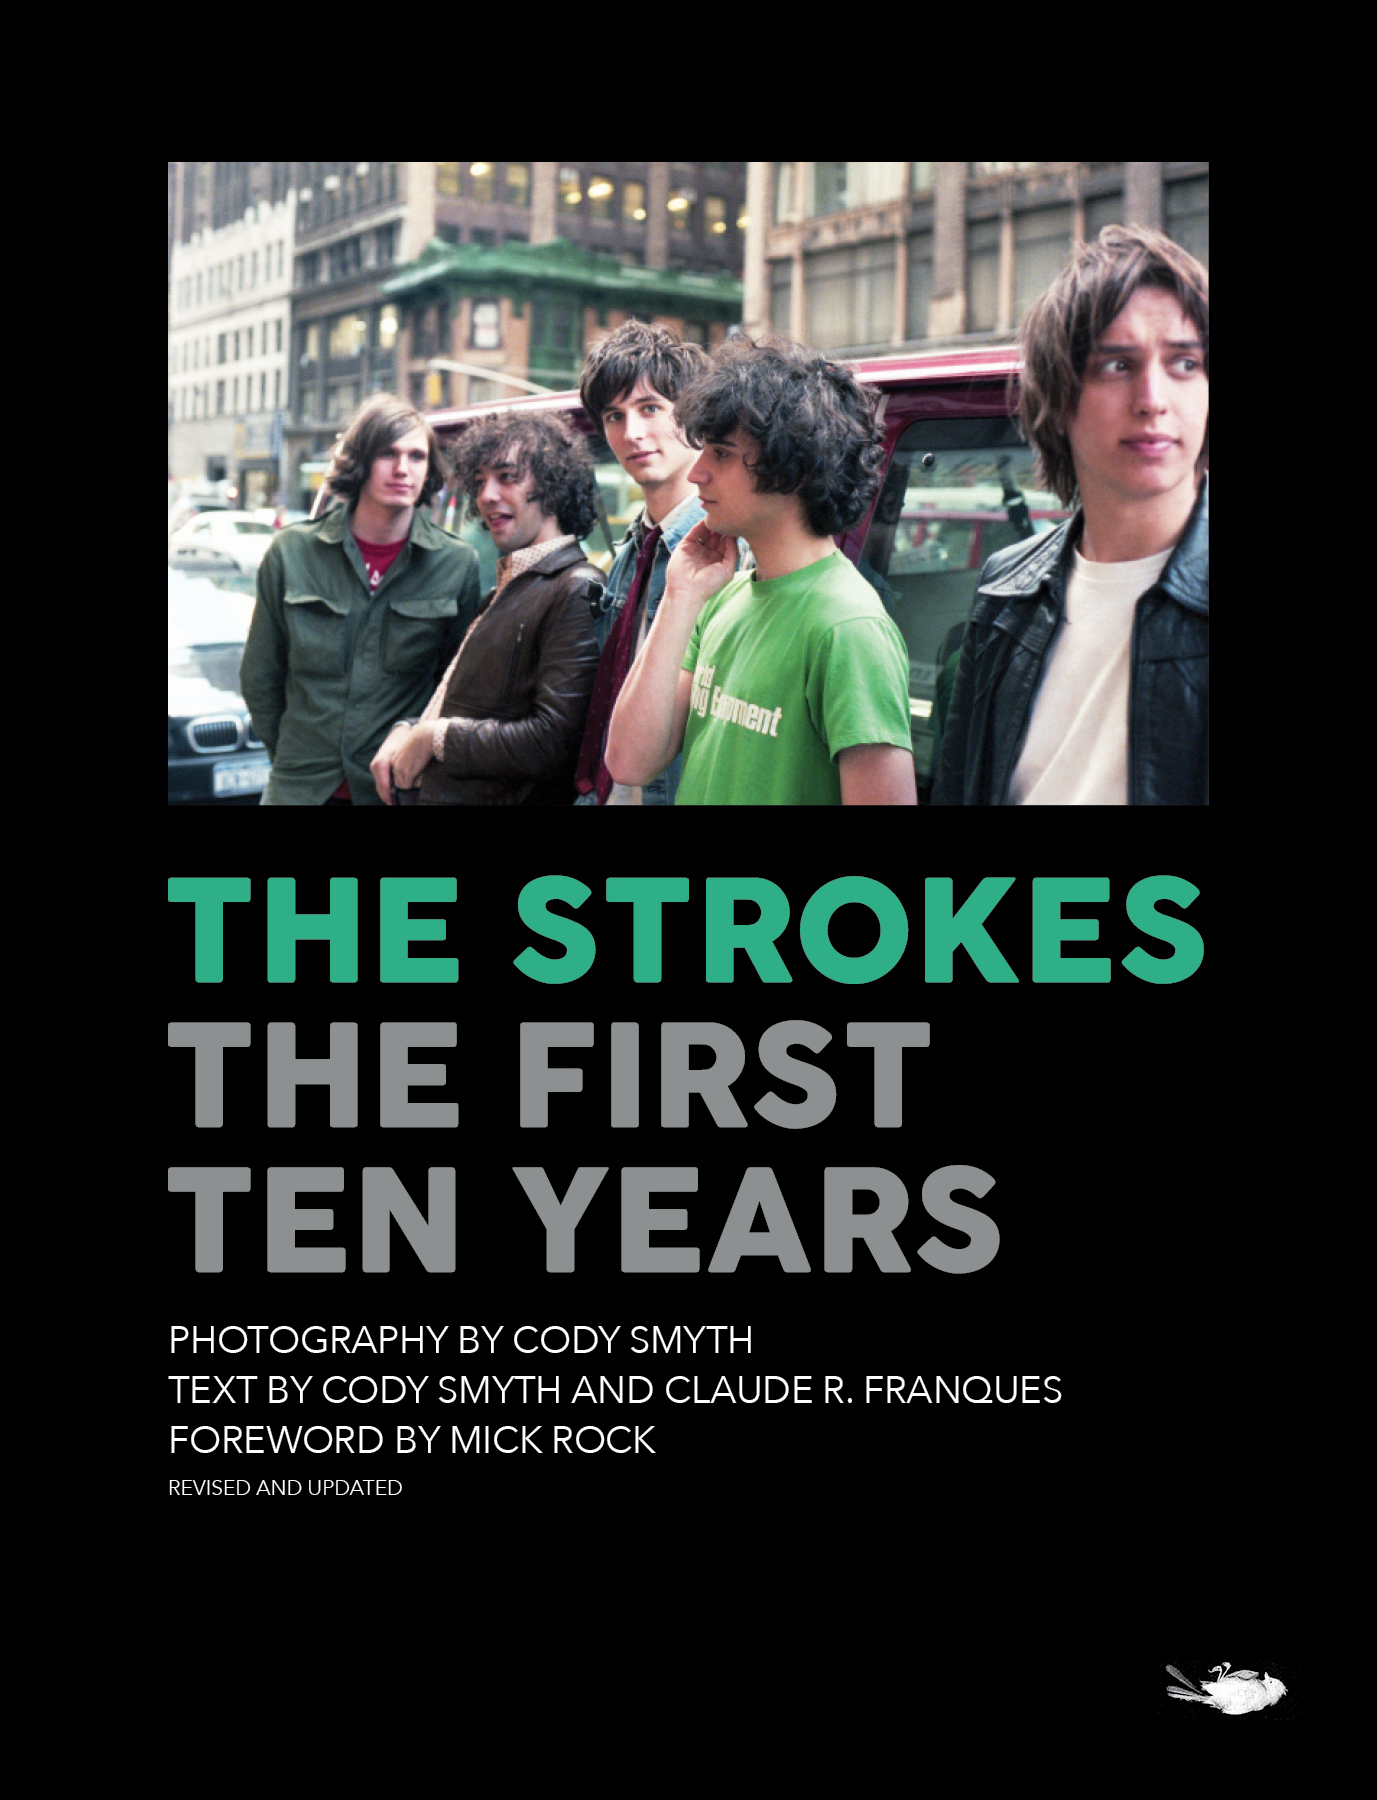 Book Launch: The Strokes The First Ten Years by Cody Smyth